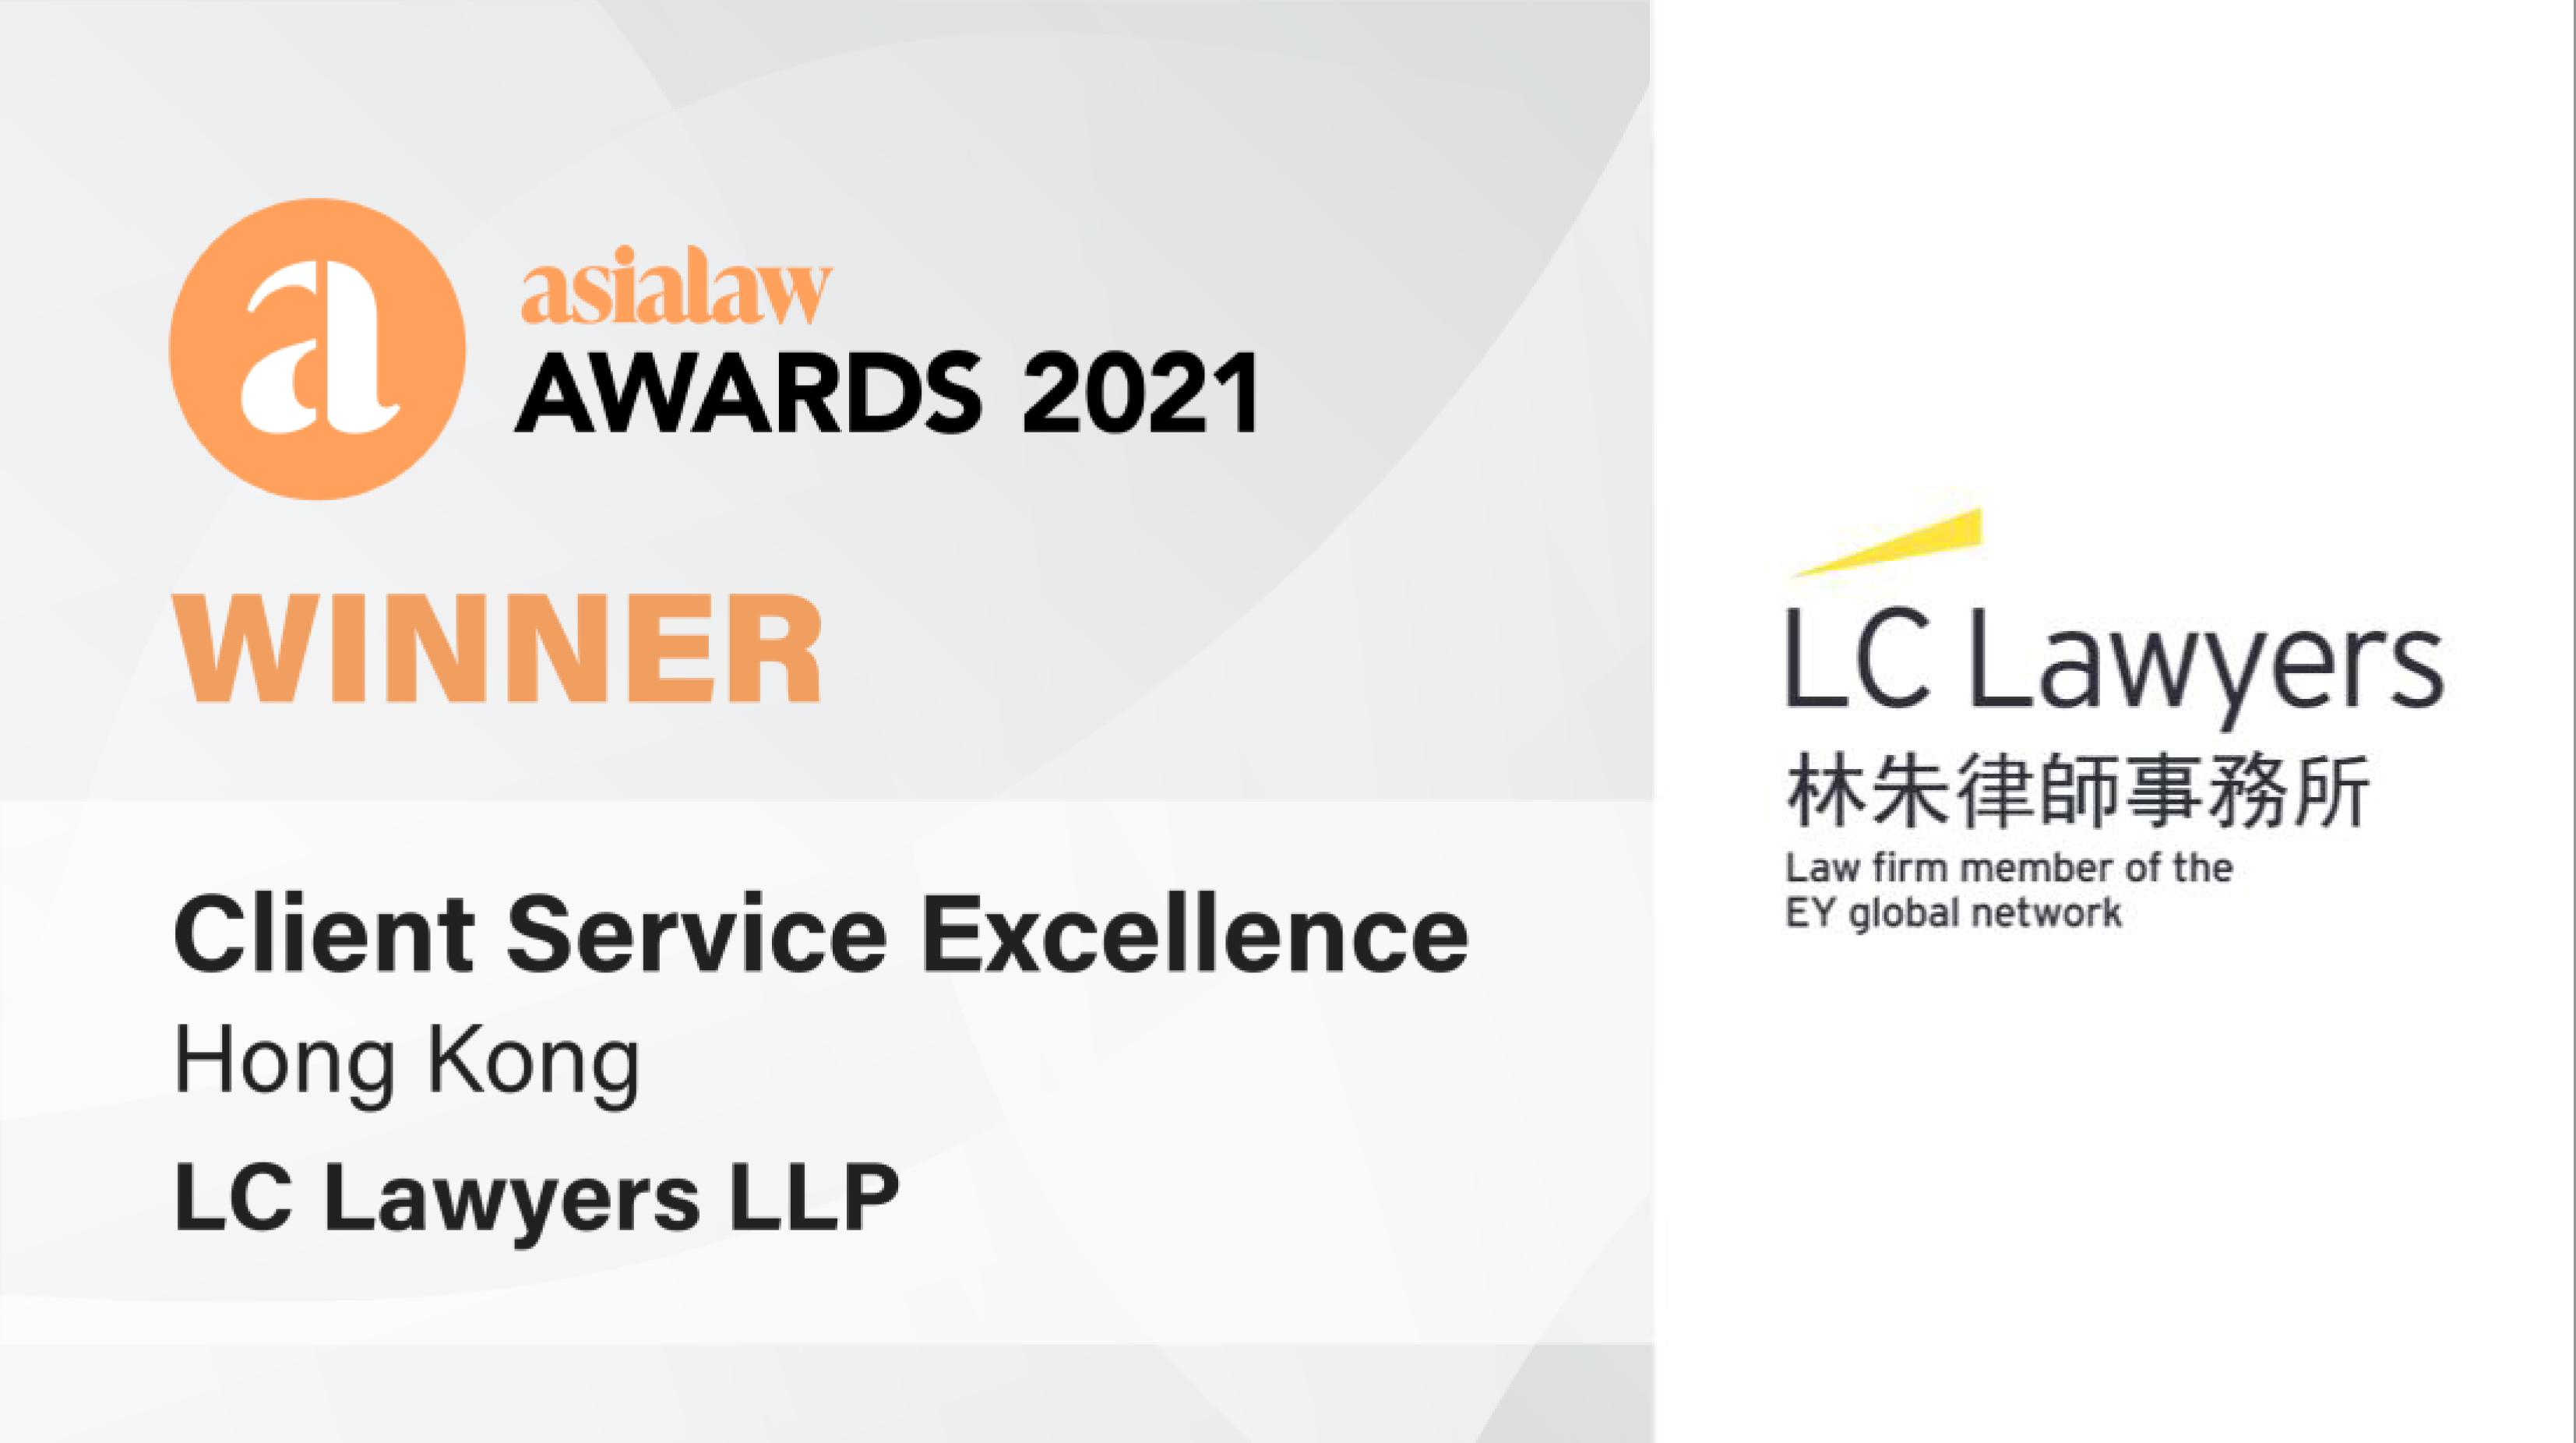 Winner of Hong Kong Client Service Excellence Award at asialaw Awards 2021